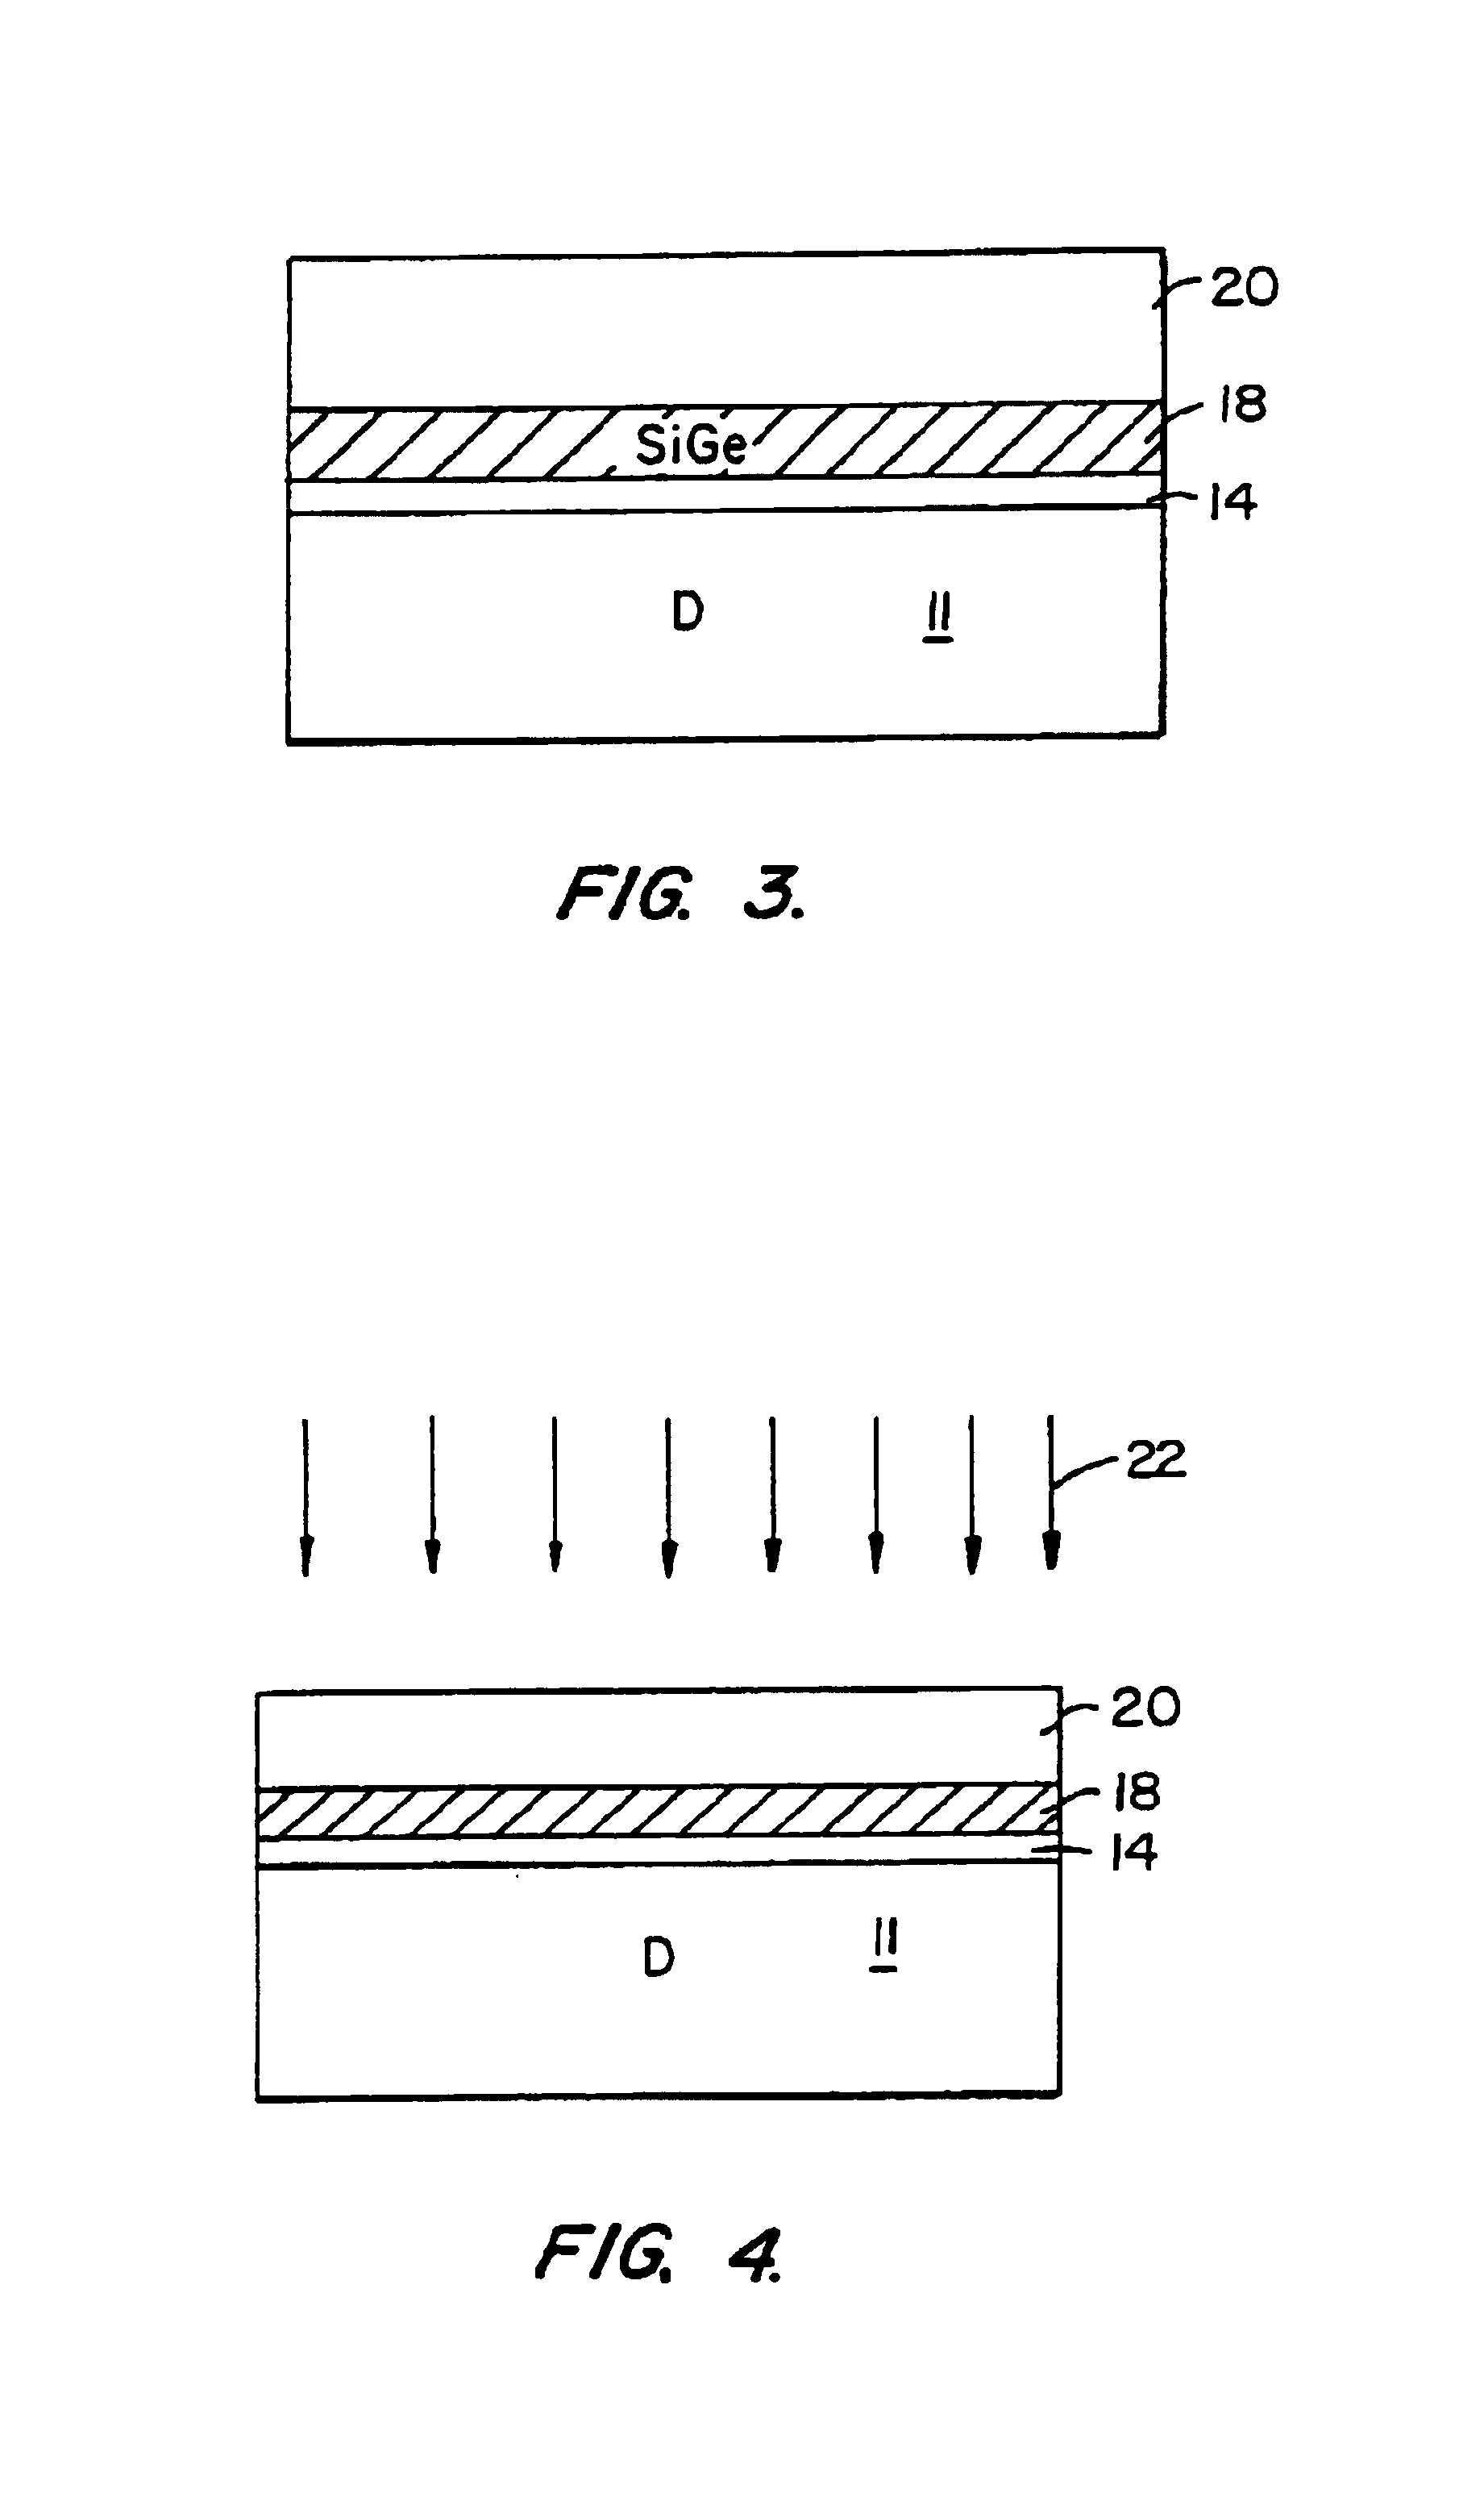 Cleaving process to fabricate multilayered substrates using low implantation doses